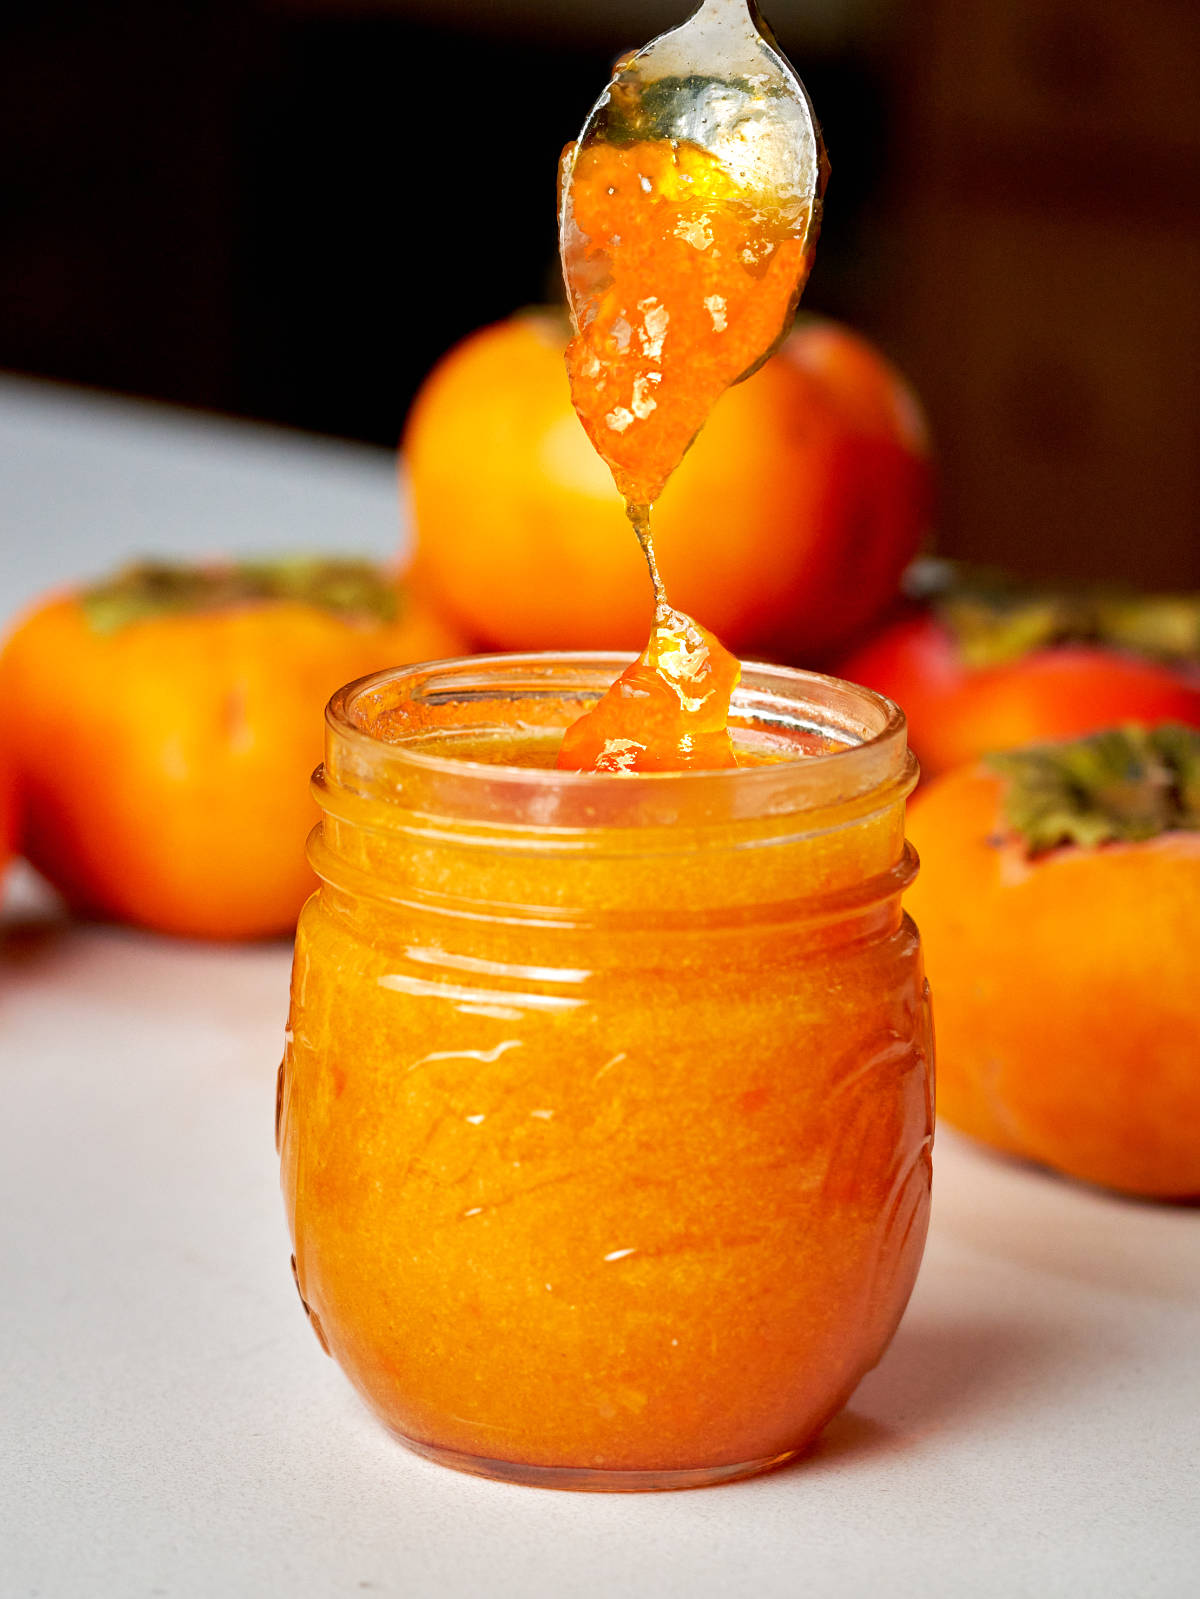 Spoon of orange jam over a small jar of jam in front of a stack of persimmons.